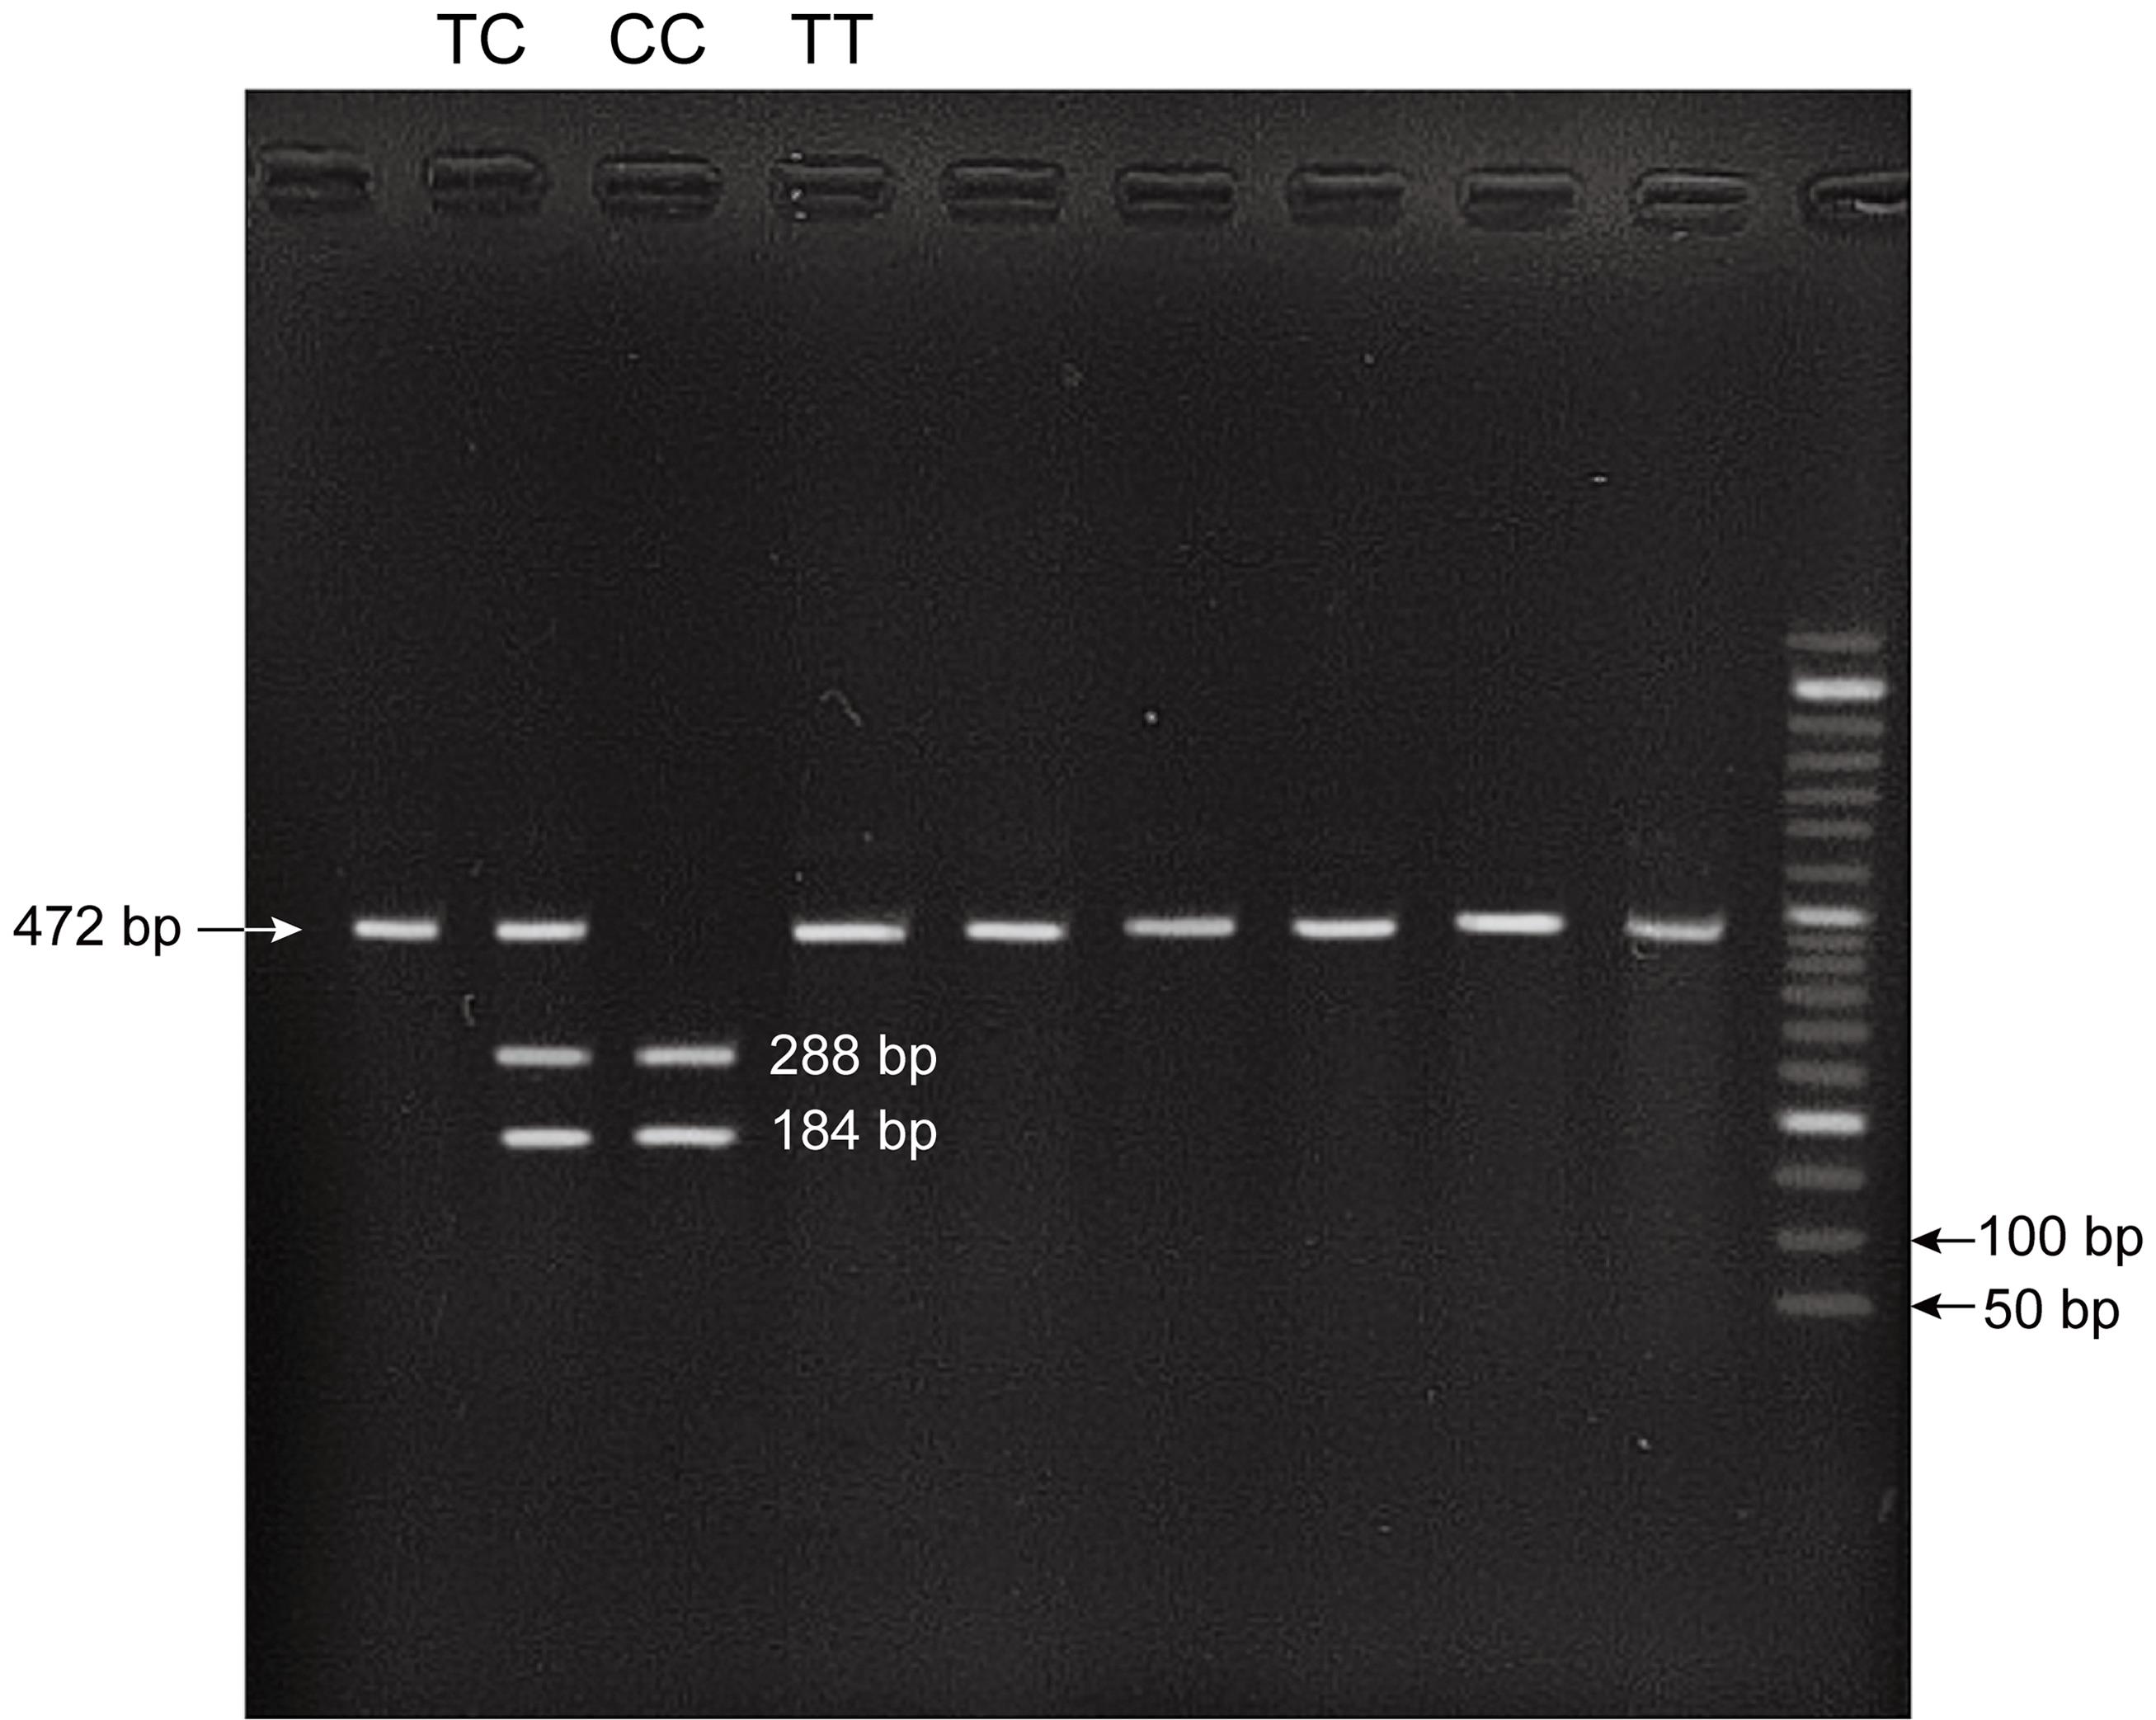 IL-27p28 (rs181206T>C) PCR product after digestion with fauI enzyme.